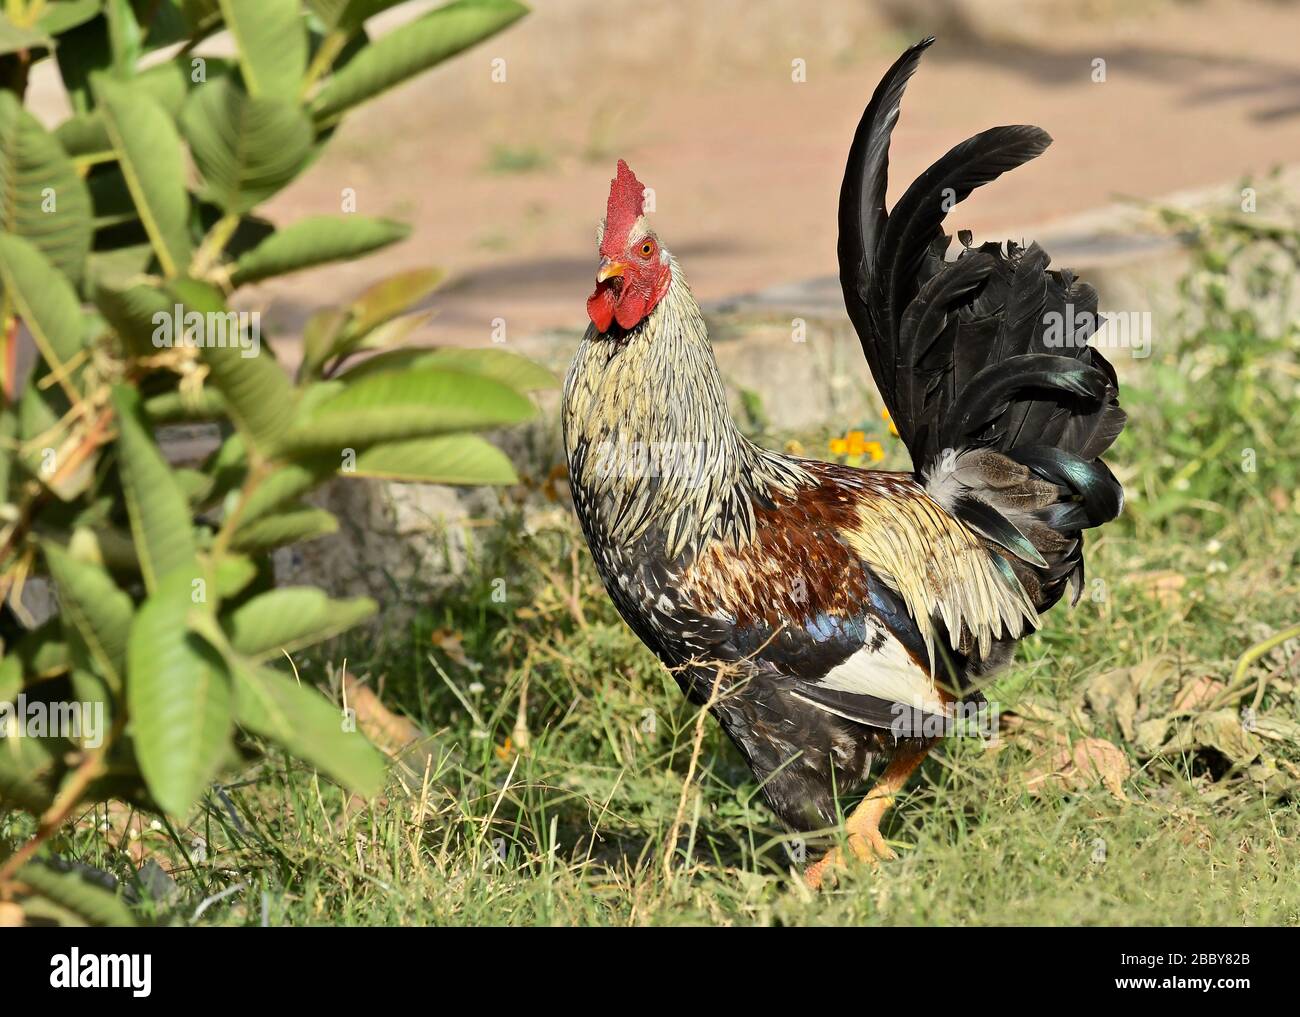 Cock / Rooster Stock Photo